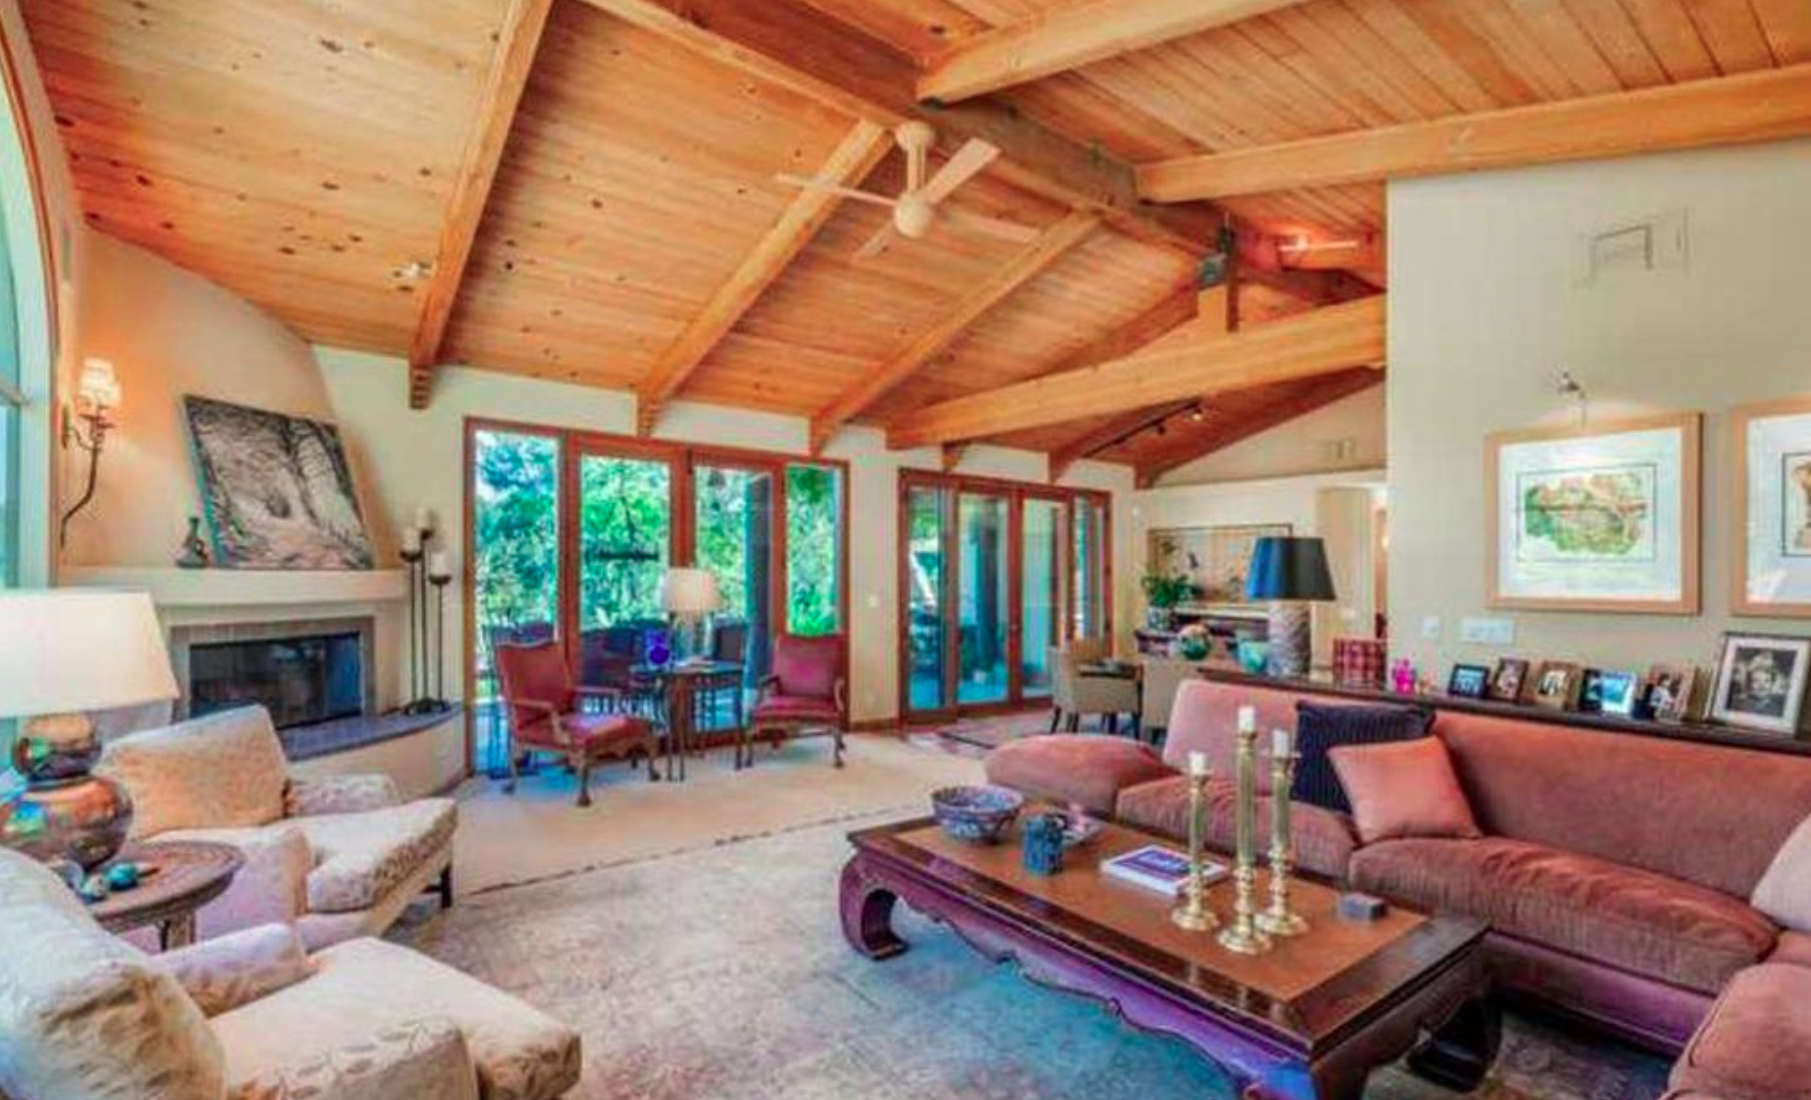 Russell Brand's Hollywood Hills Home